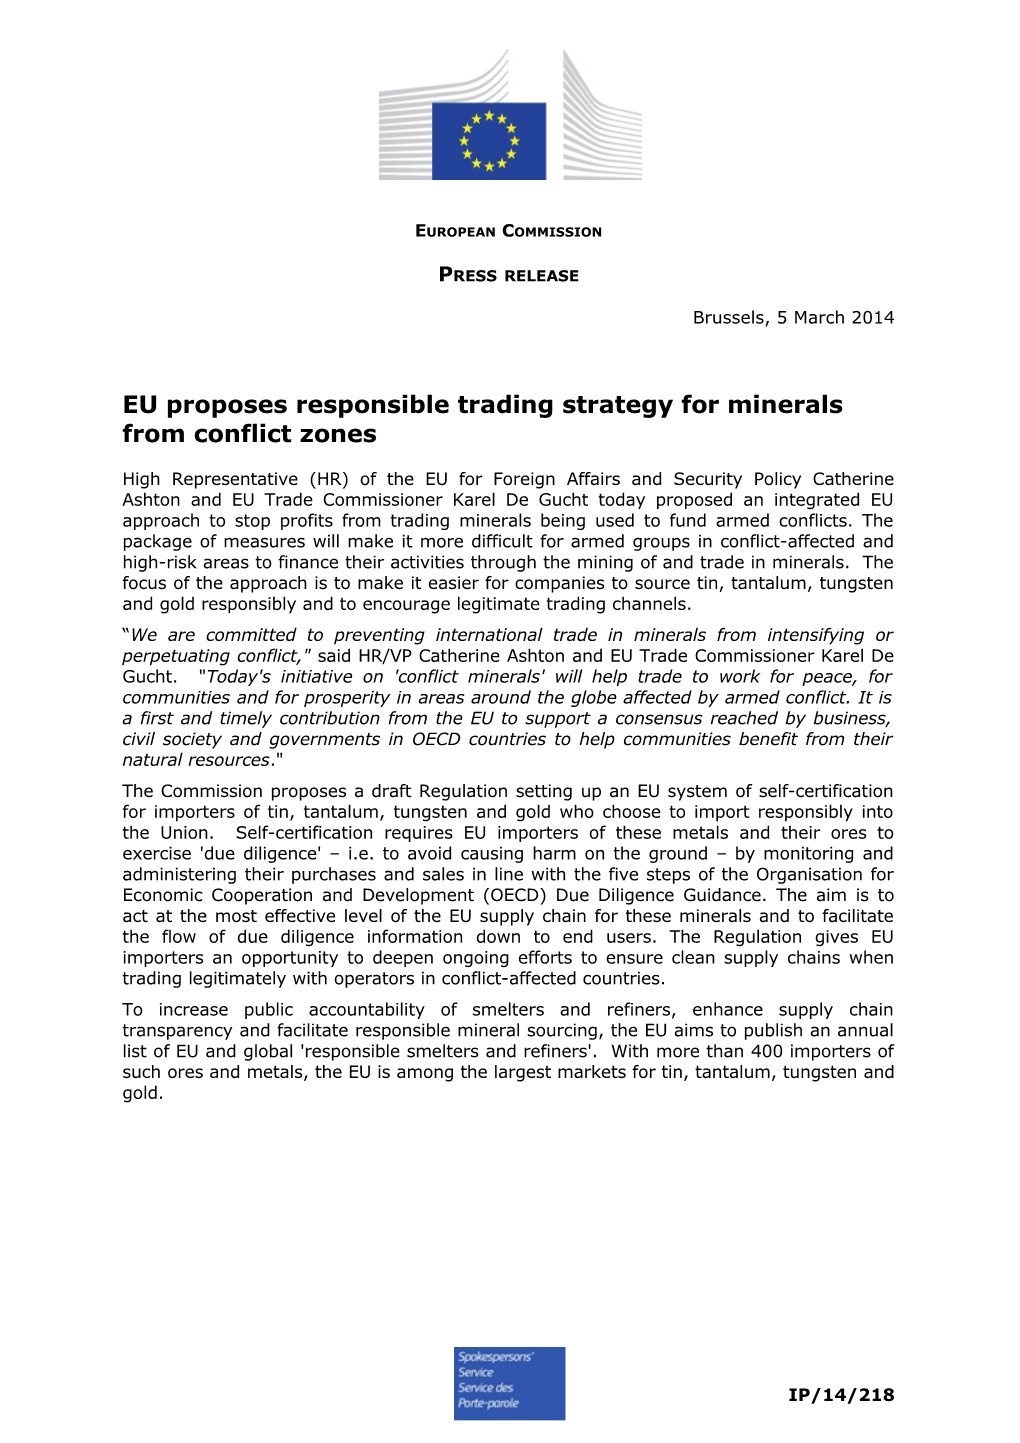 EU Proposes Responsible Trading Strategy for Minerals from Conflict Zones